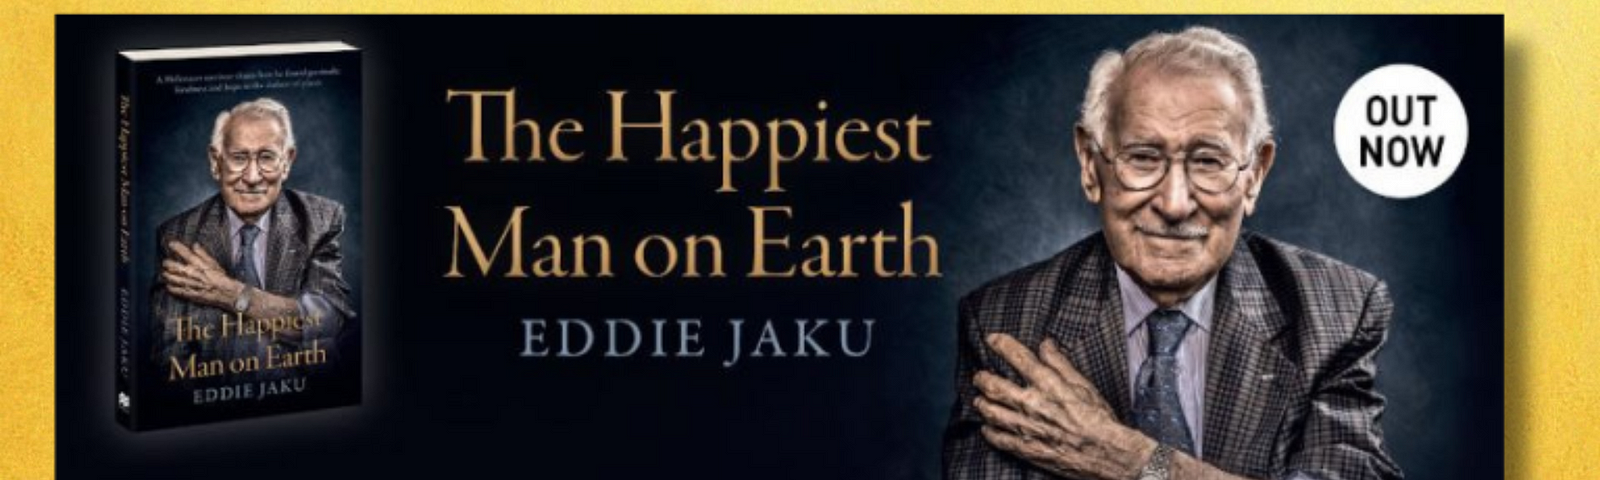 6 LESSONS FROM THE HAPPIEST MAN ON EARTH